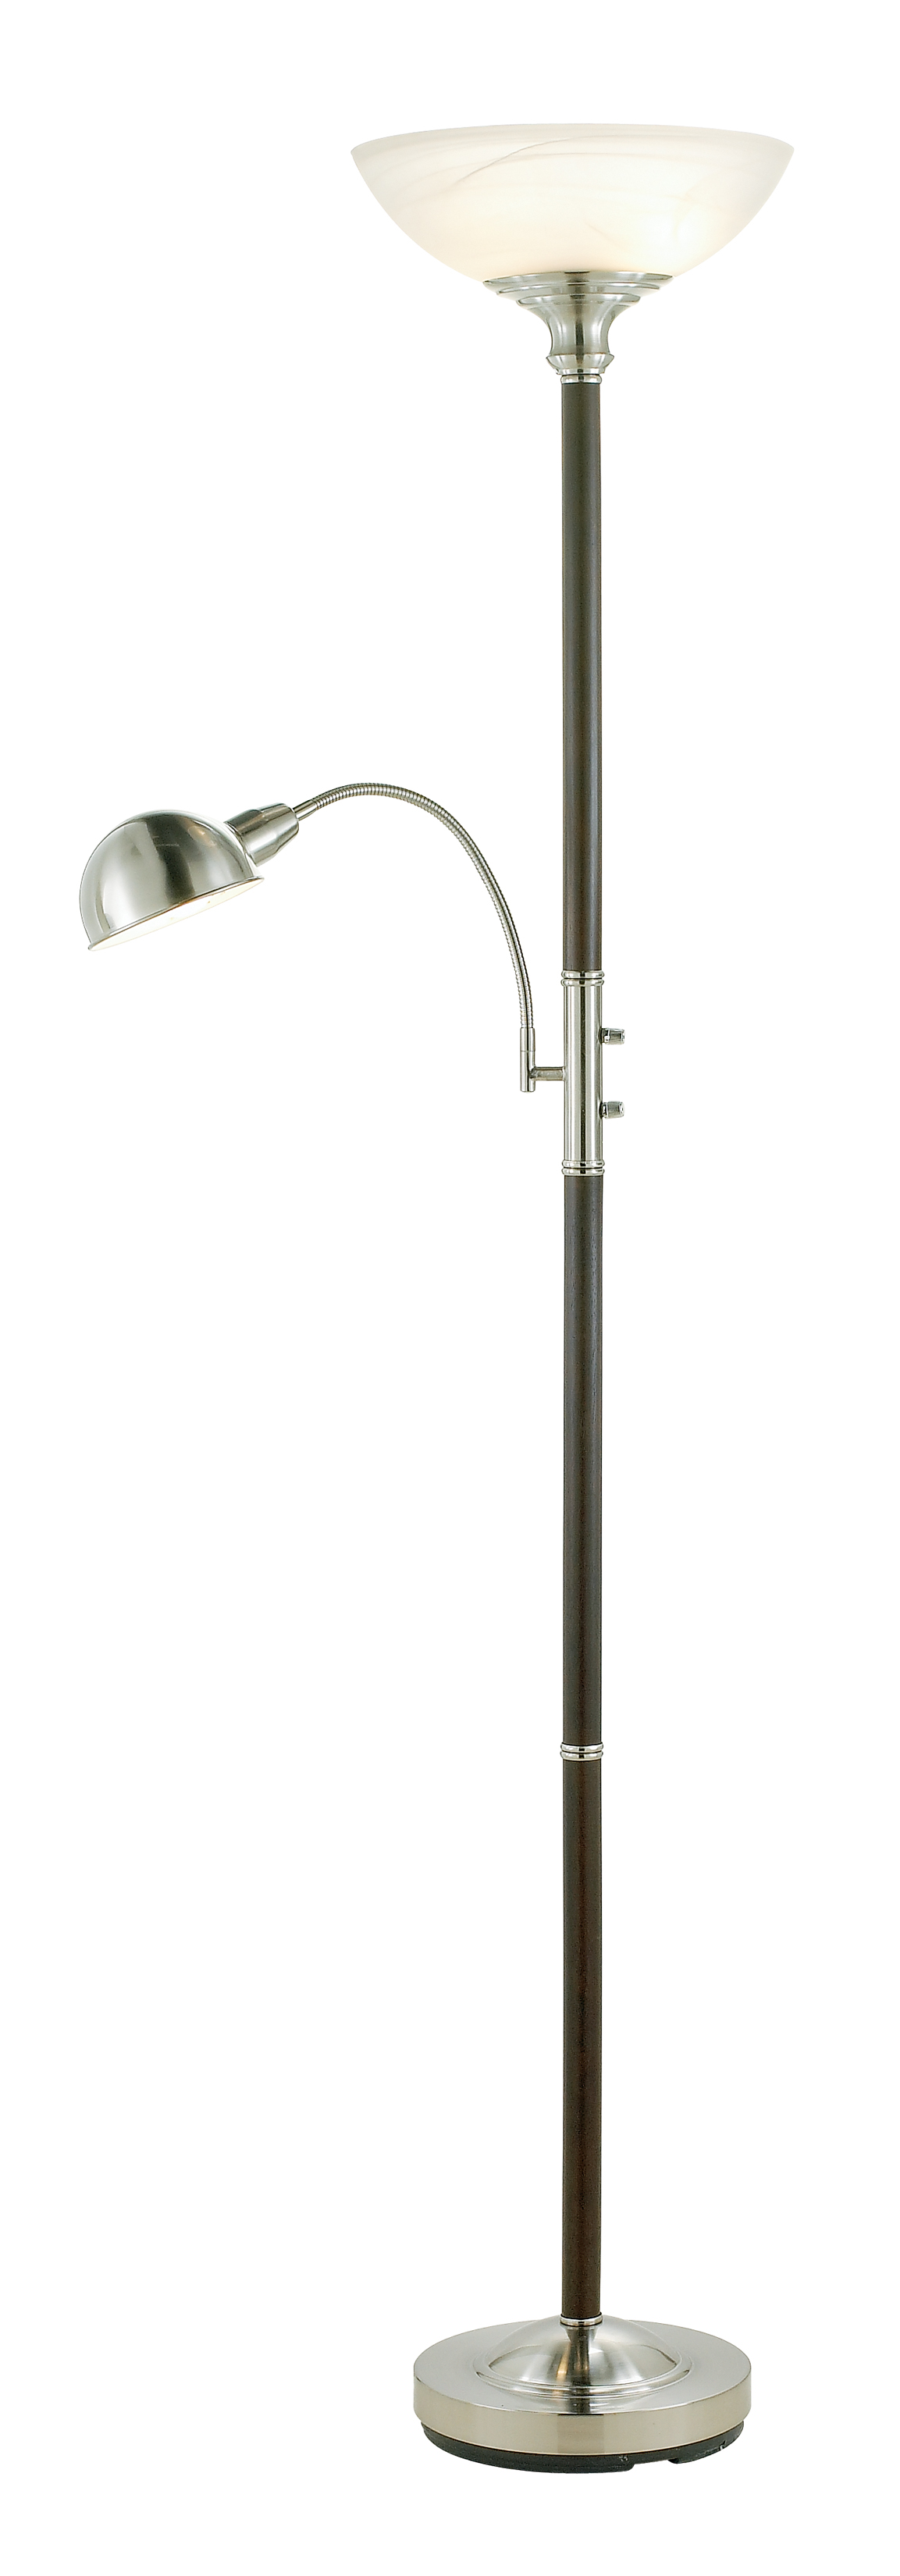 Frosted Glass Dome Shade, Floor Lamp With Reading Light And Glass Steel Shades